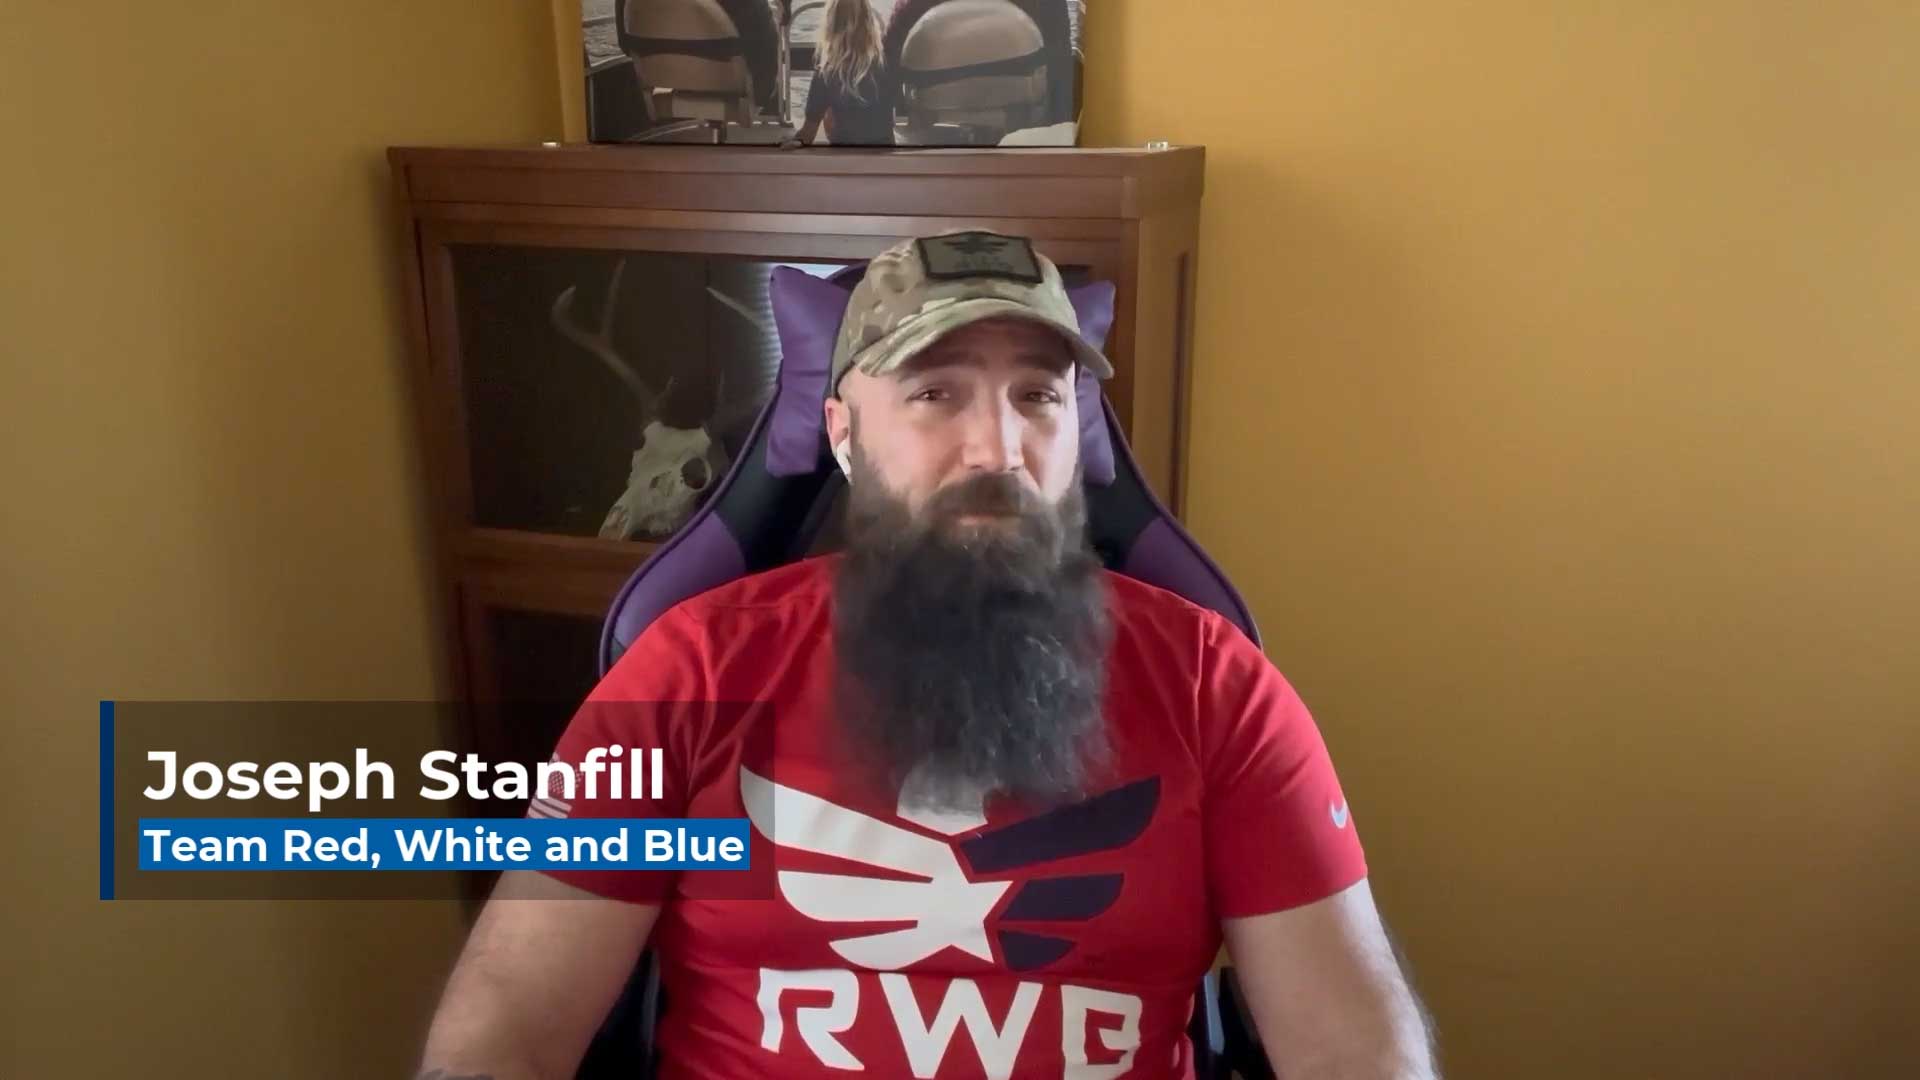 U.S. Army veteran Joseph Stanfill gives back to fellow vets with Team Red, White, and Blue